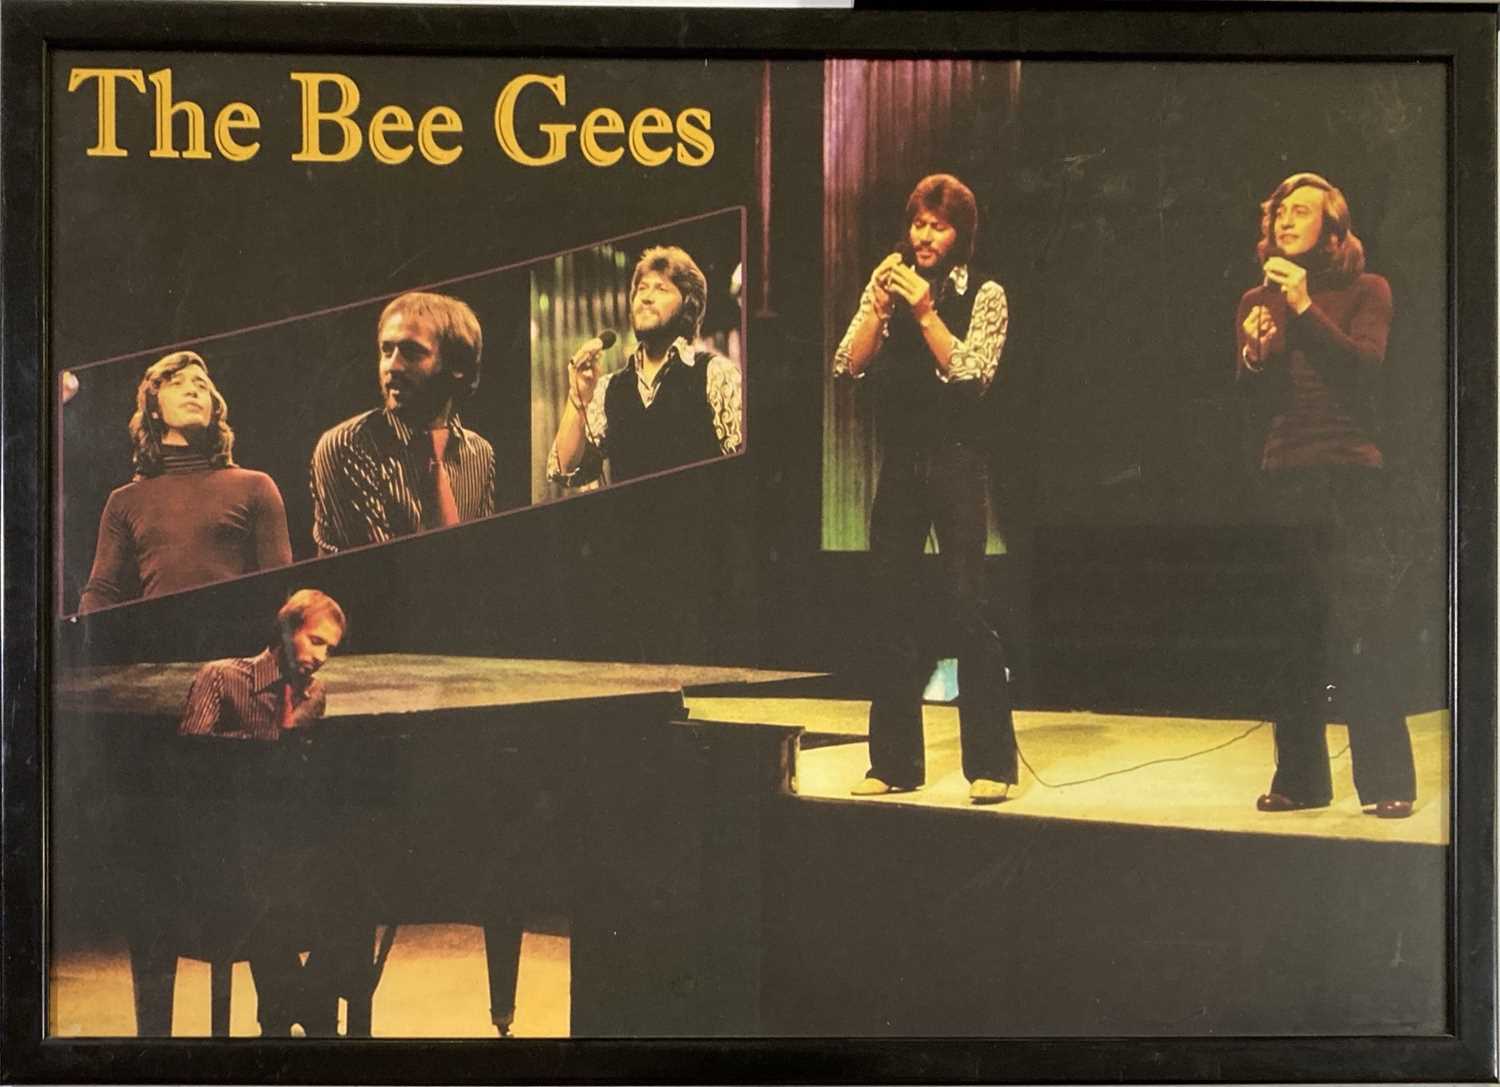 CONCERT MEMORABILIA INC PROGRAMMES AND POSTERS - BOB DYLAN / BEE GEES. - Image 7 of 9